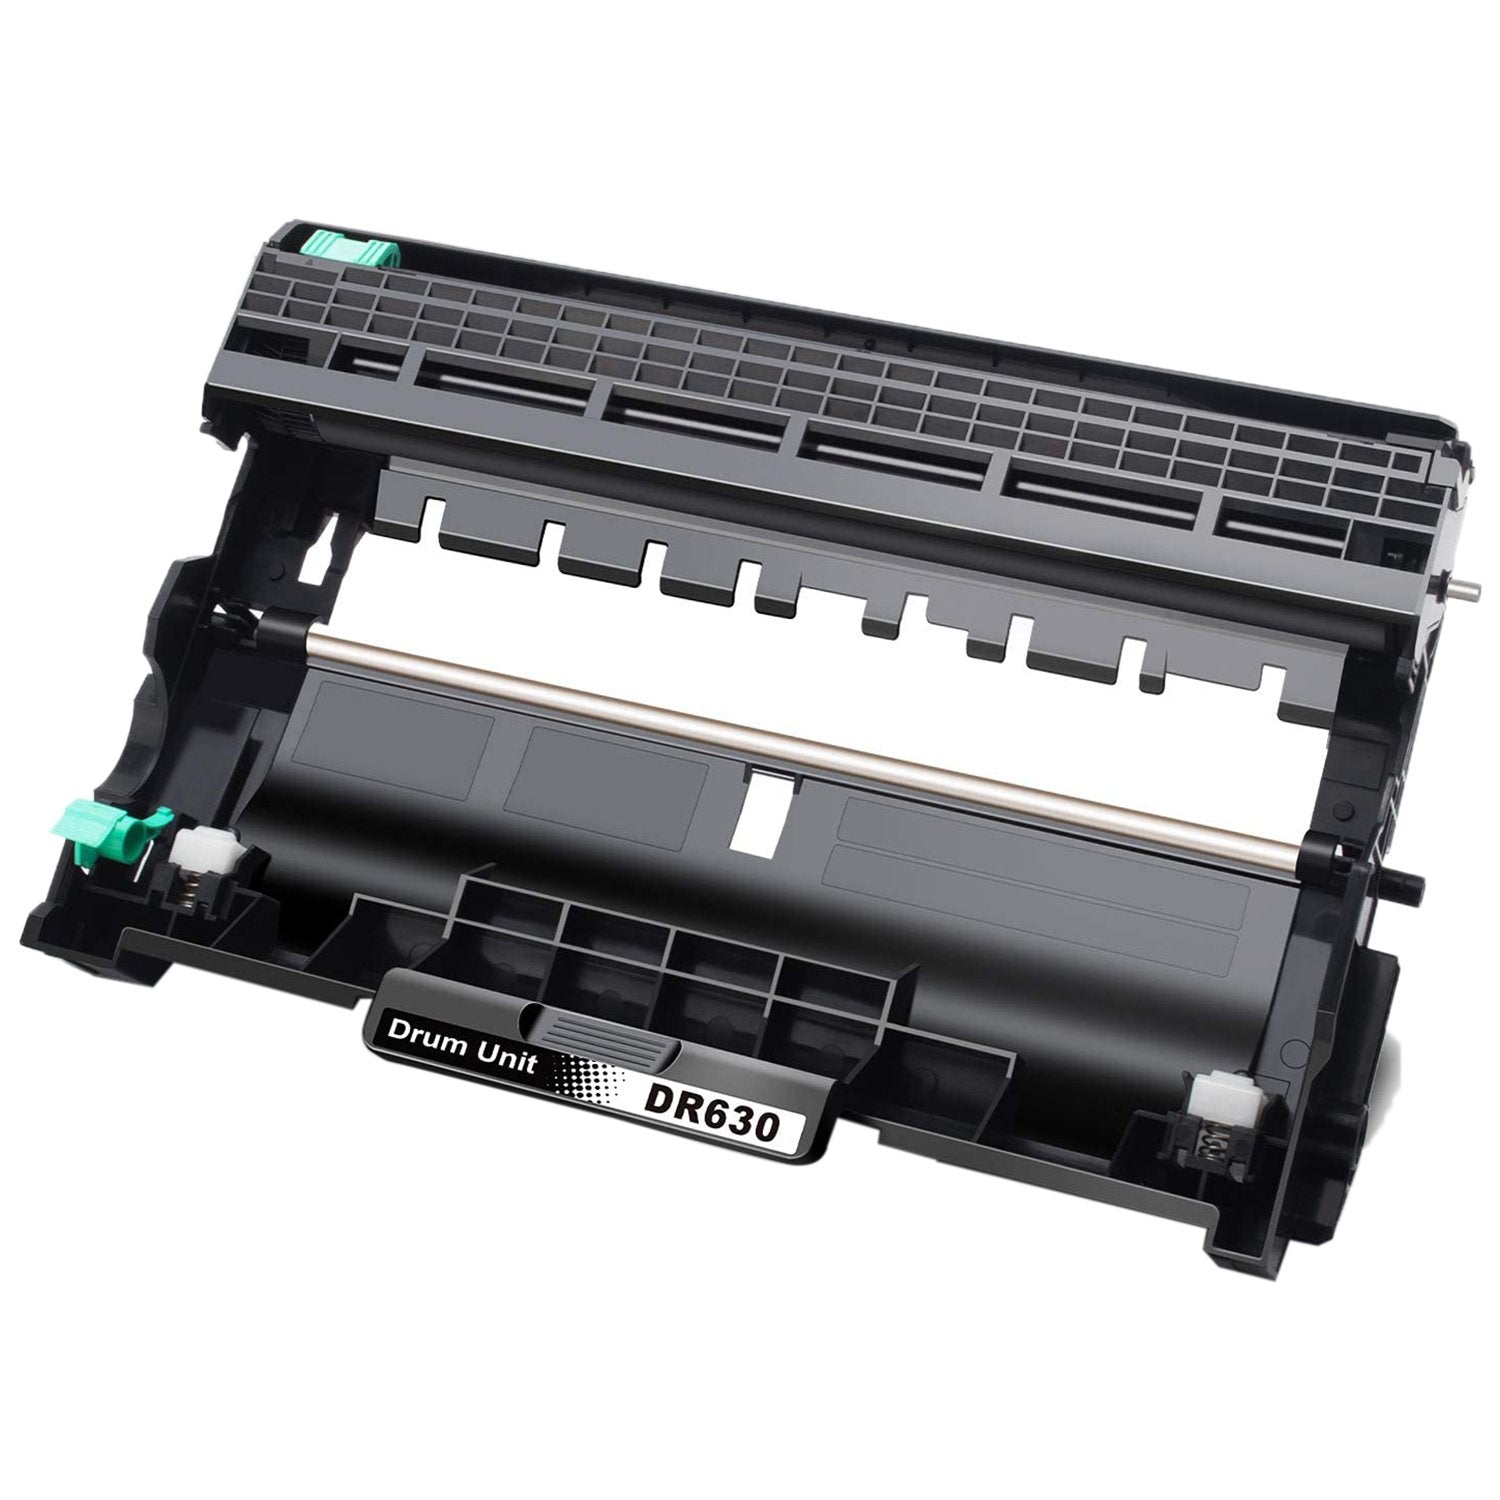 Absolute Toner Compatible DR-630 DR630 Black Drum Unit Cartridge for Brother Printers | Absolute Toner Brother Drum Unit